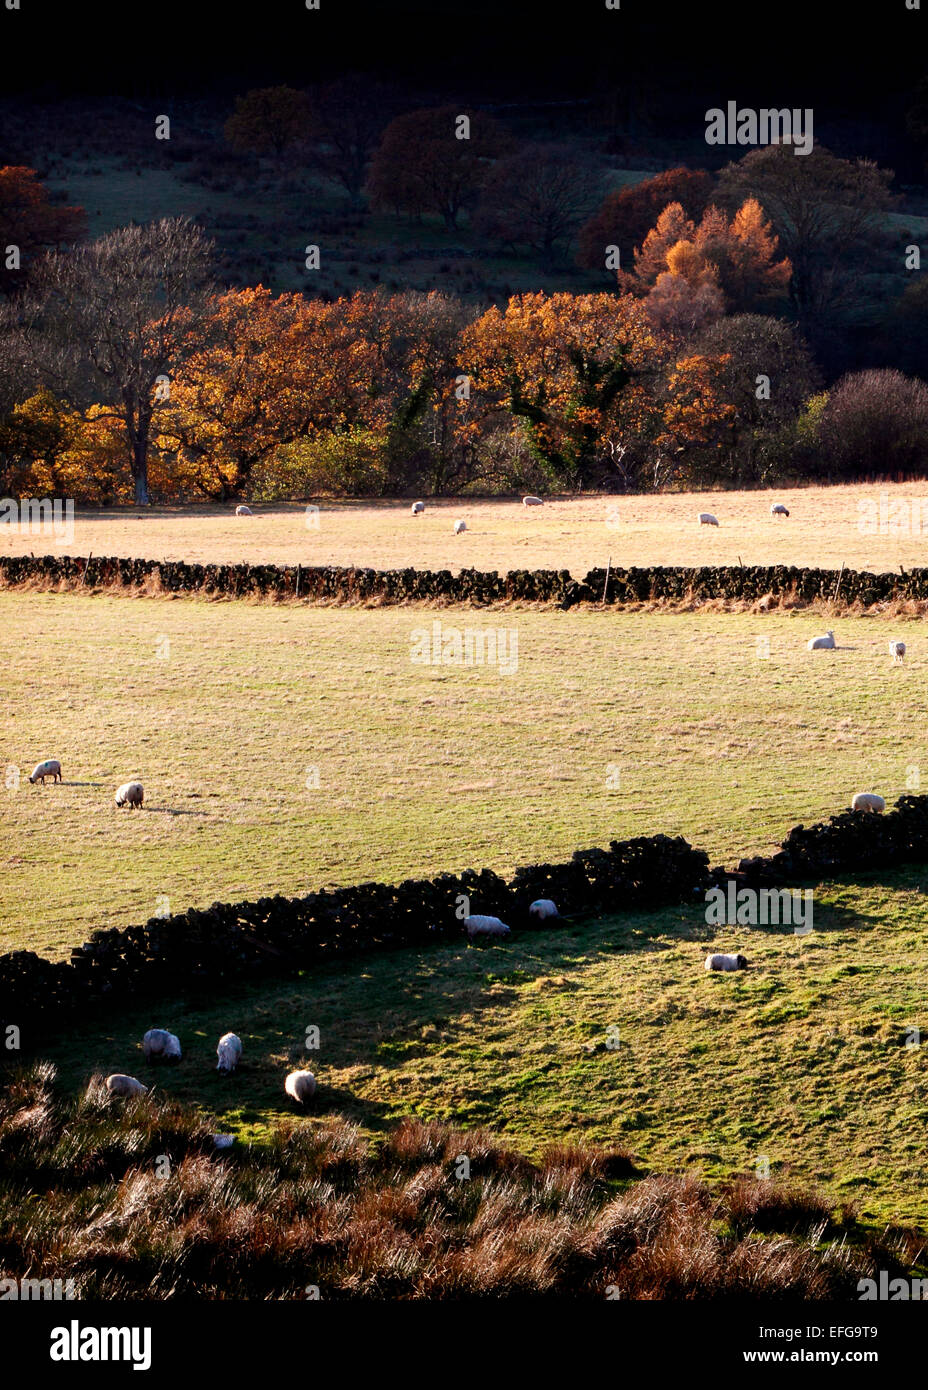 Autumn landscape with sheep grazing in sunlit fields, Yorkshire Dales, England, UK Stock Photo